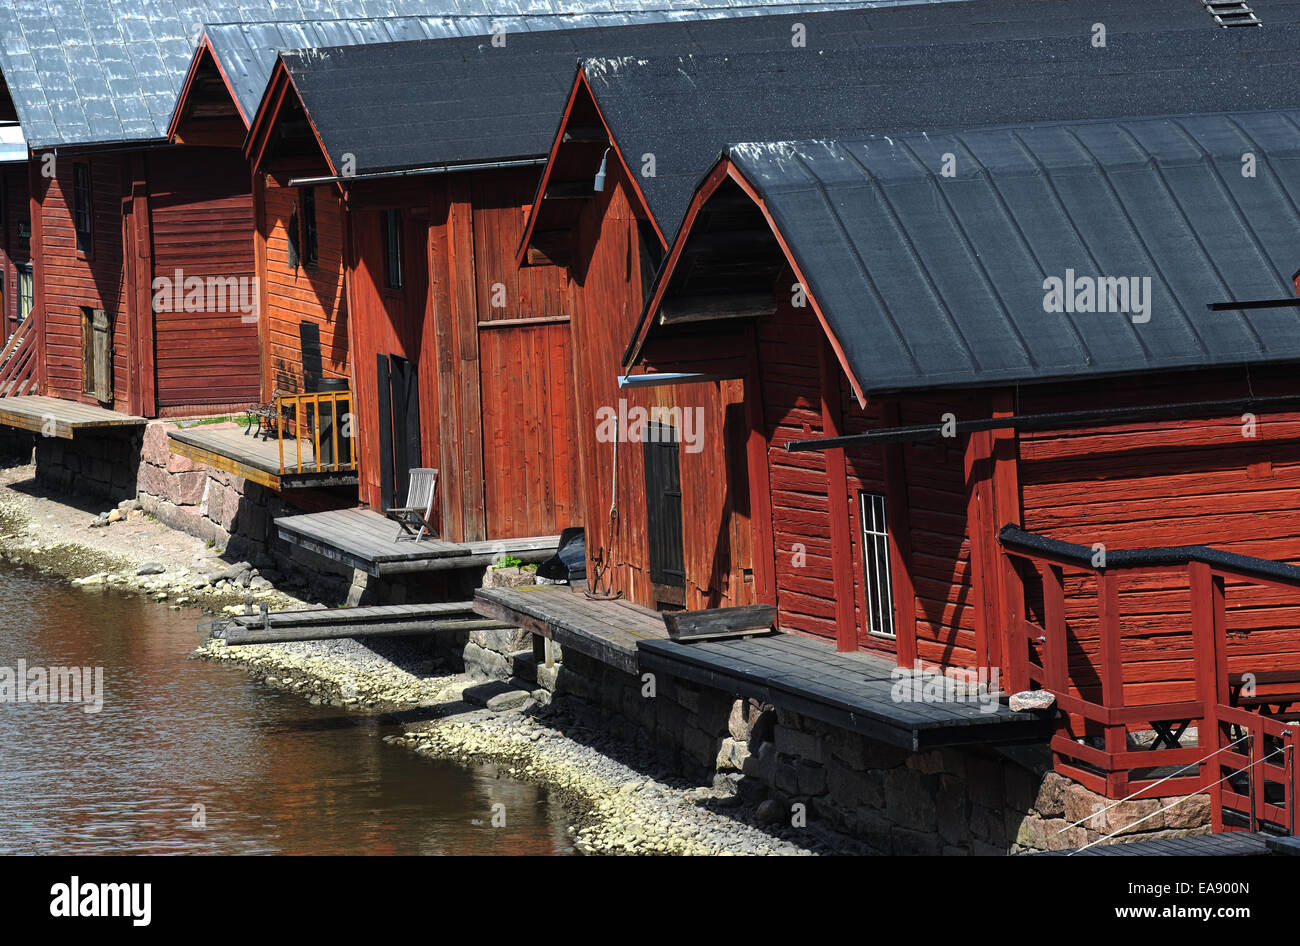 wooden barns near the river in the old town of Porvoo, Finland, Europe Stock Photo